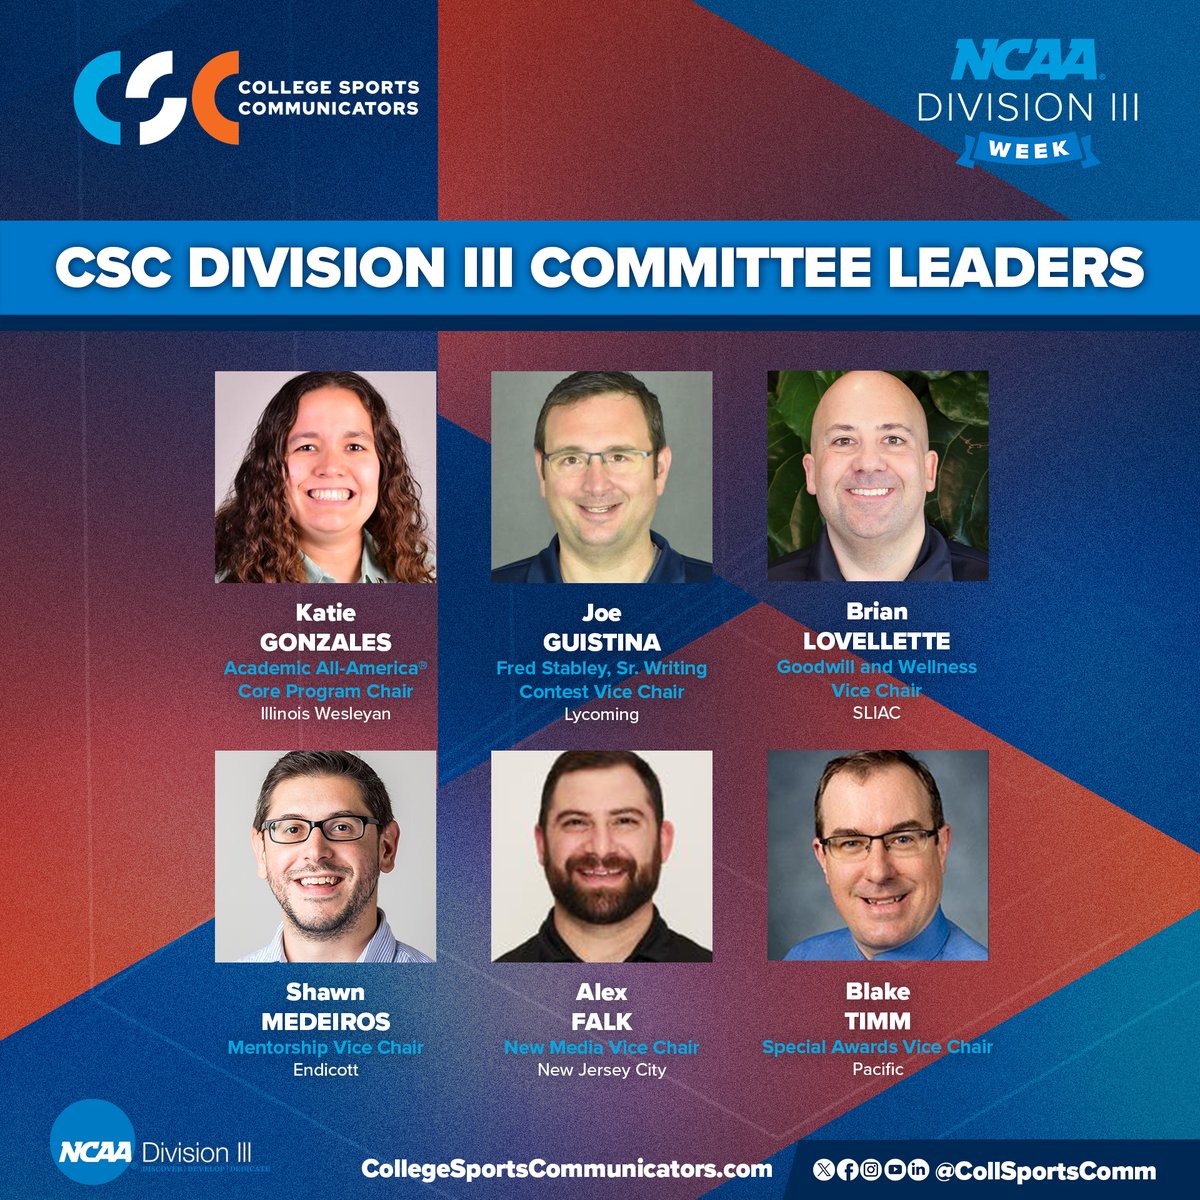 We're continuing the @NCAADIII #D3Week celebration with a spotlight on our CSC committee leaders! Thank you for all that you do! @KTG_012, @iwusports Joe Guistina, @lycoathletics @realBLOVE, @SLIAC @Shawn_Medeiros, @ECGulls @alex_falk, @NJCUAthletics @timmbr, @pacificu